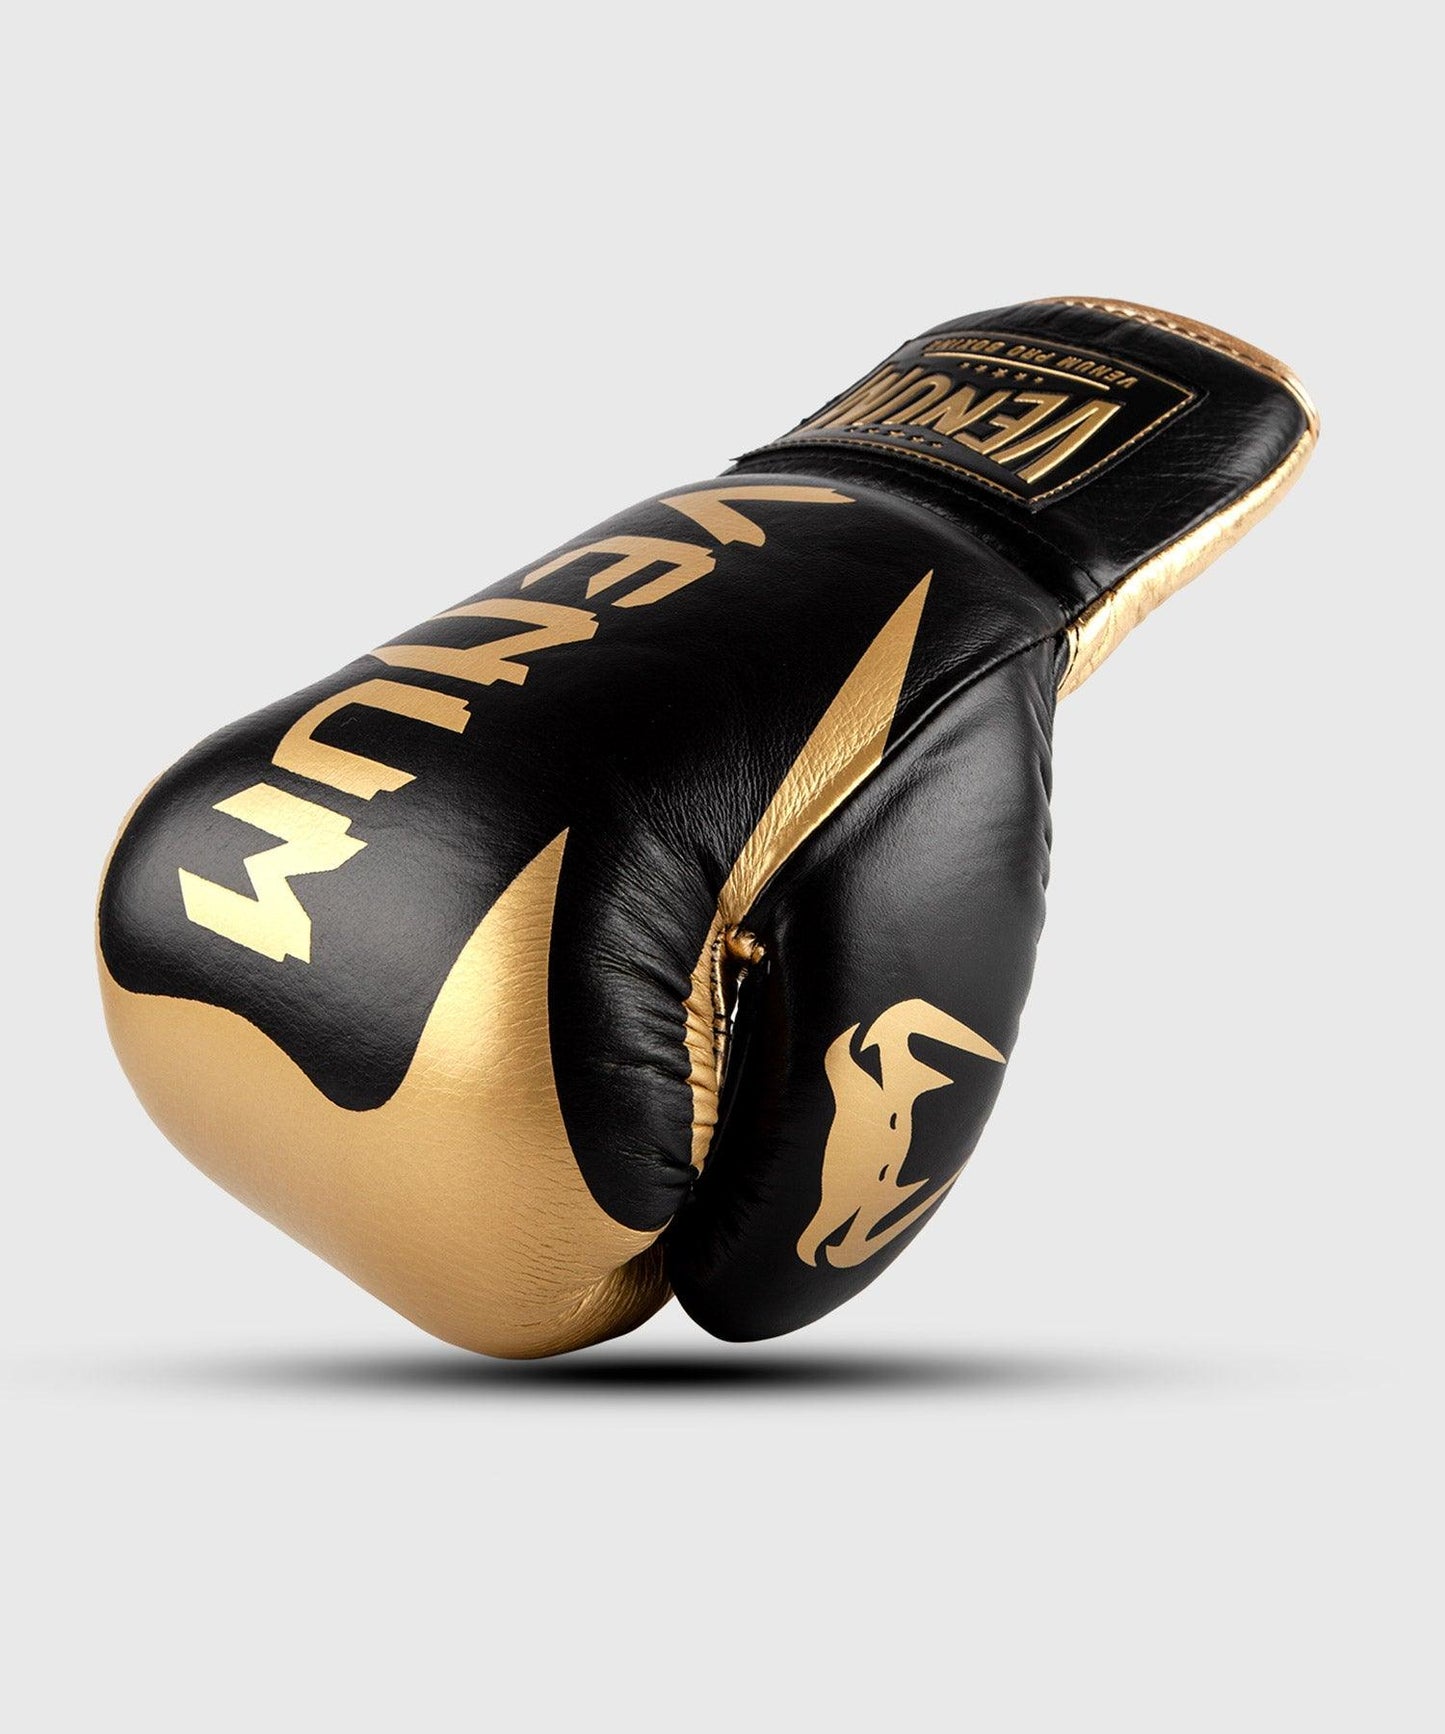 Venum Hammer Pro Boxing Gloves - With Laces - Black/Gold Picture 1